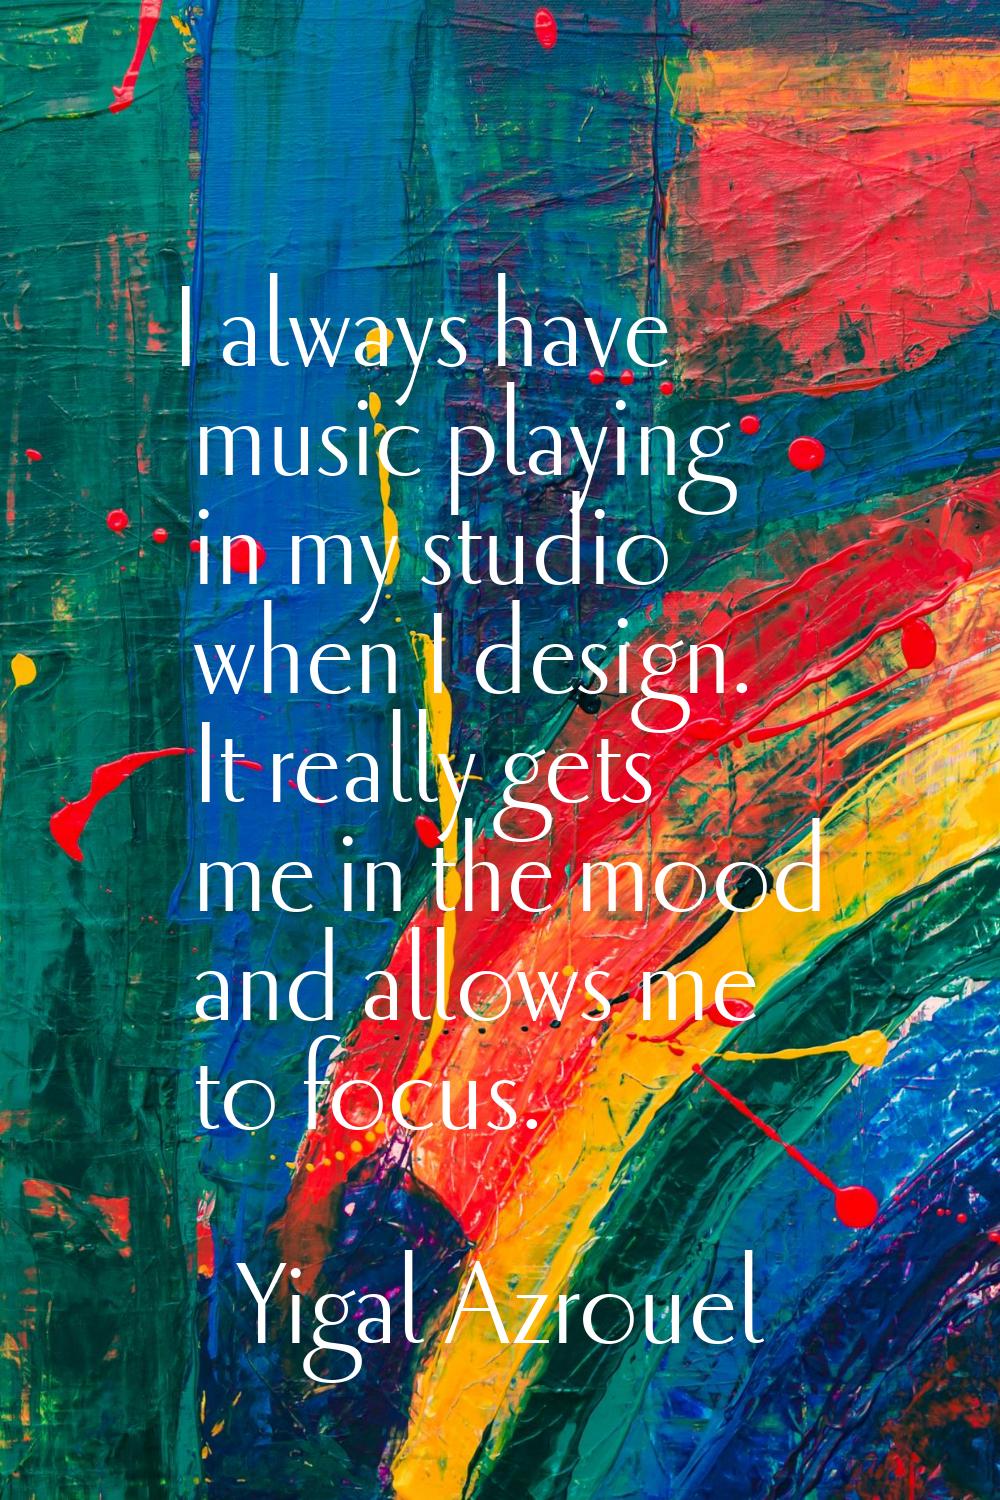 I always have music playing in my studio when I design. It really gets me in the mood and allows me